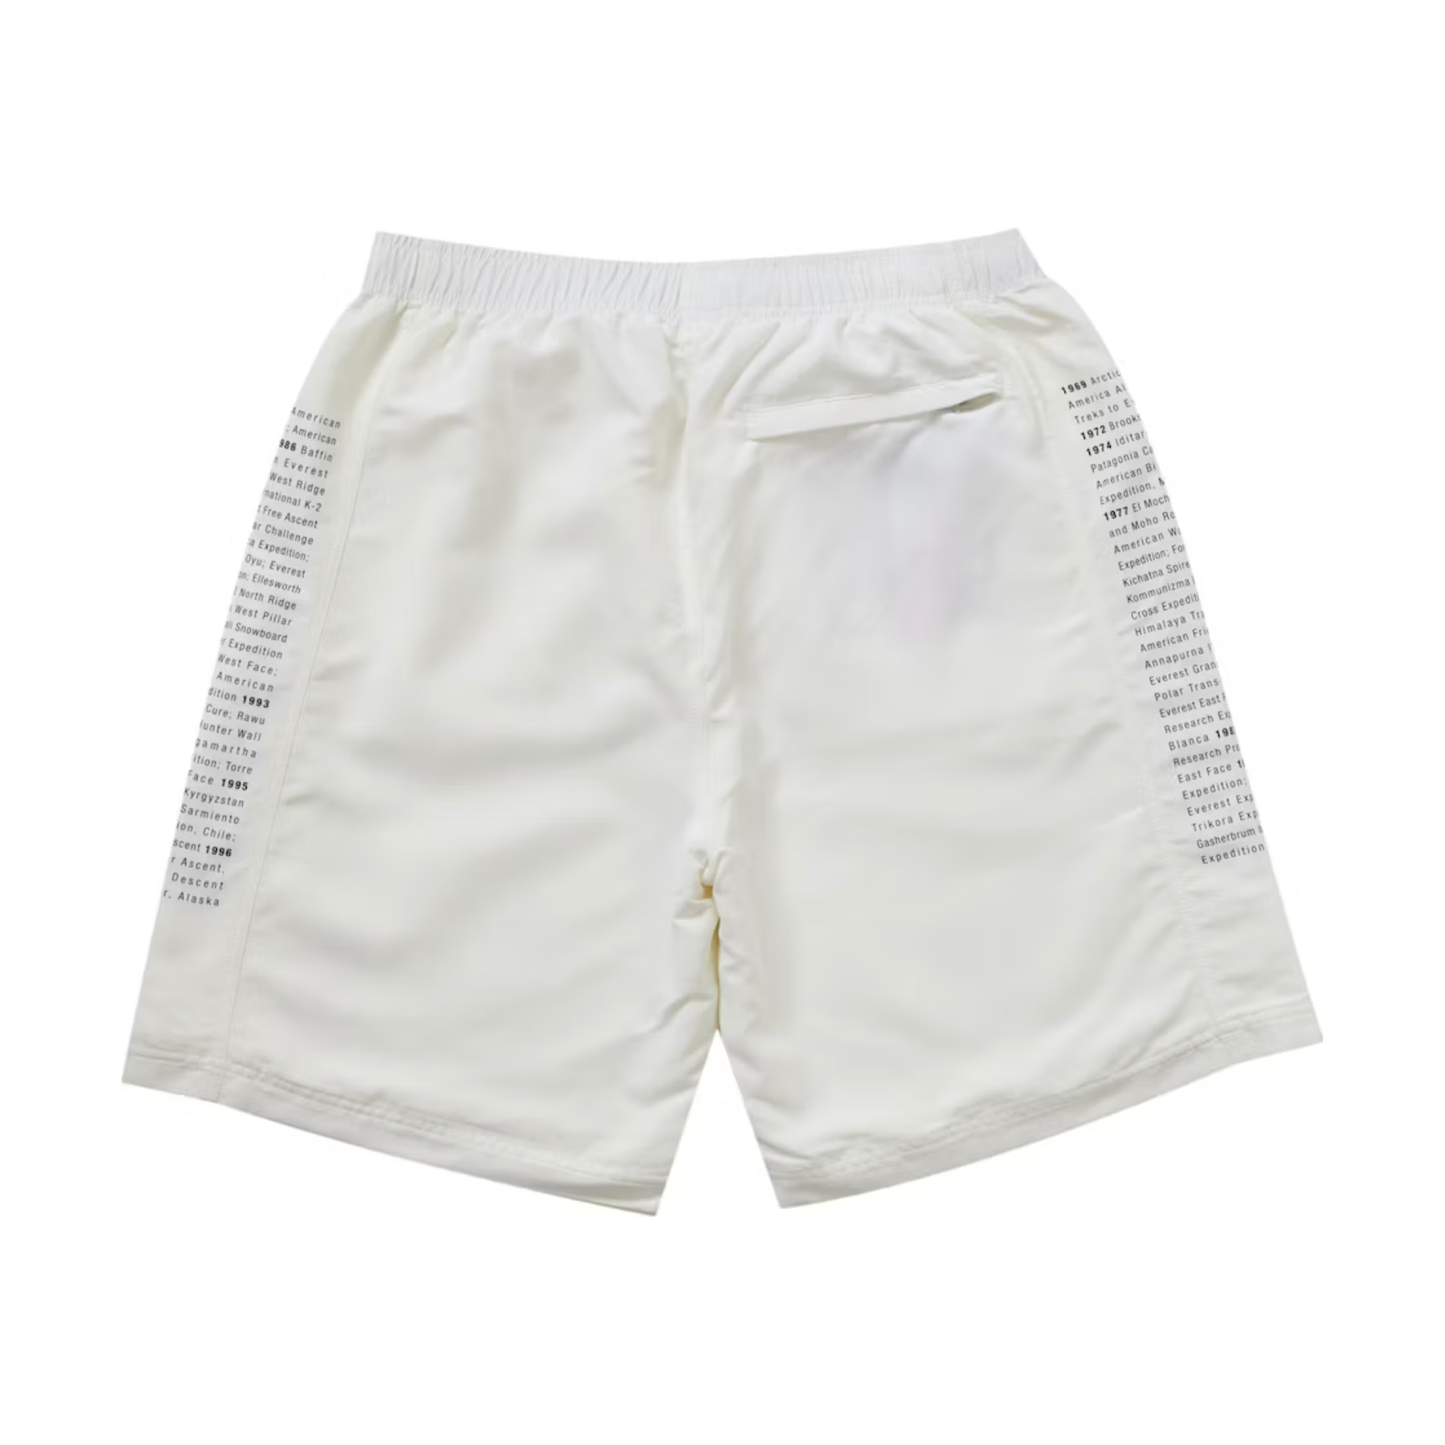 Supreme The North Face Nylon Short White by Supreme from £165.00